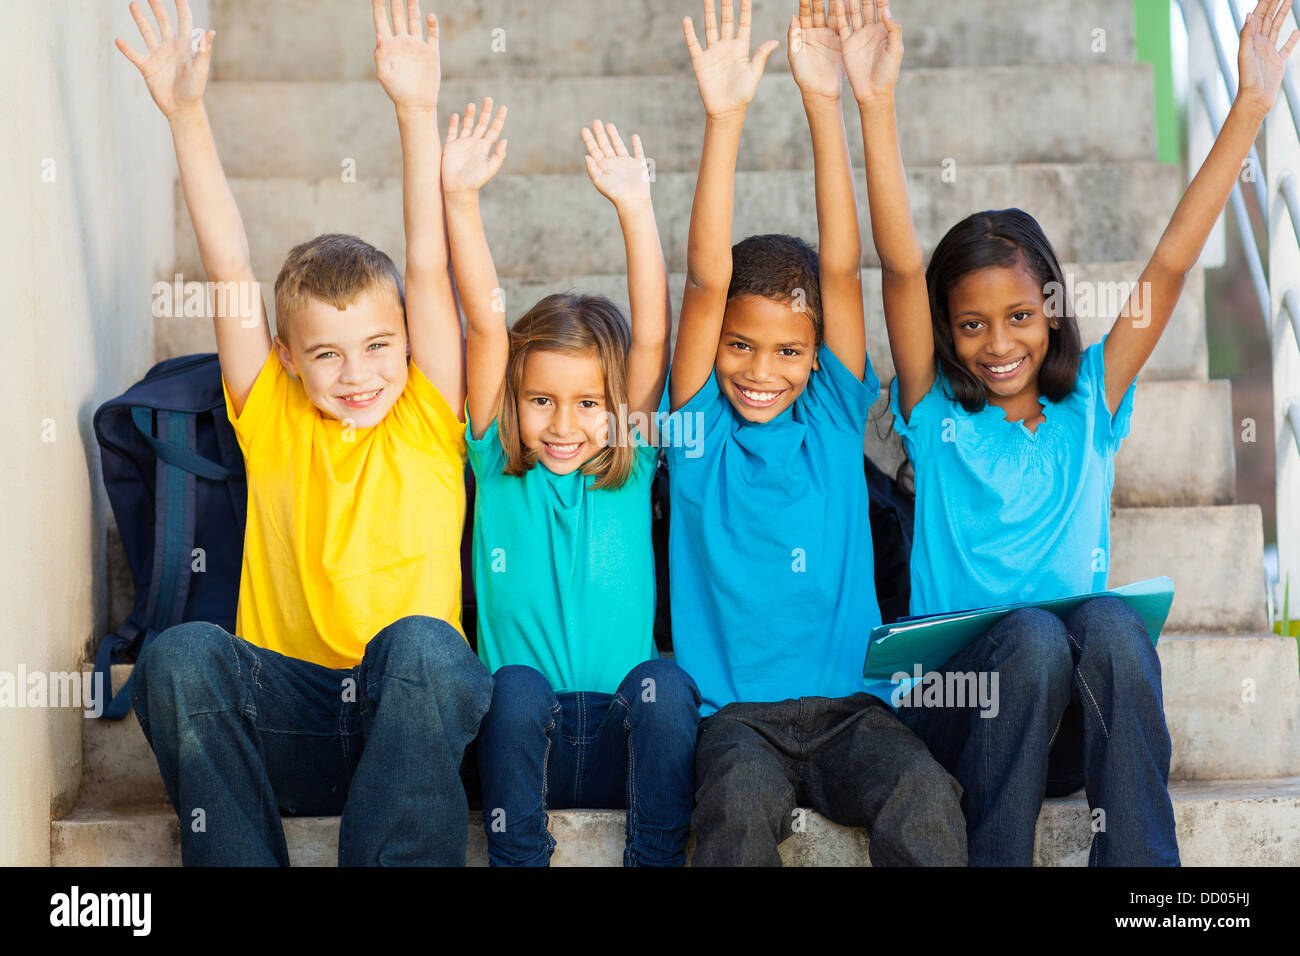 group of happy primary students with hands raised sitting outdoors Stock Photo